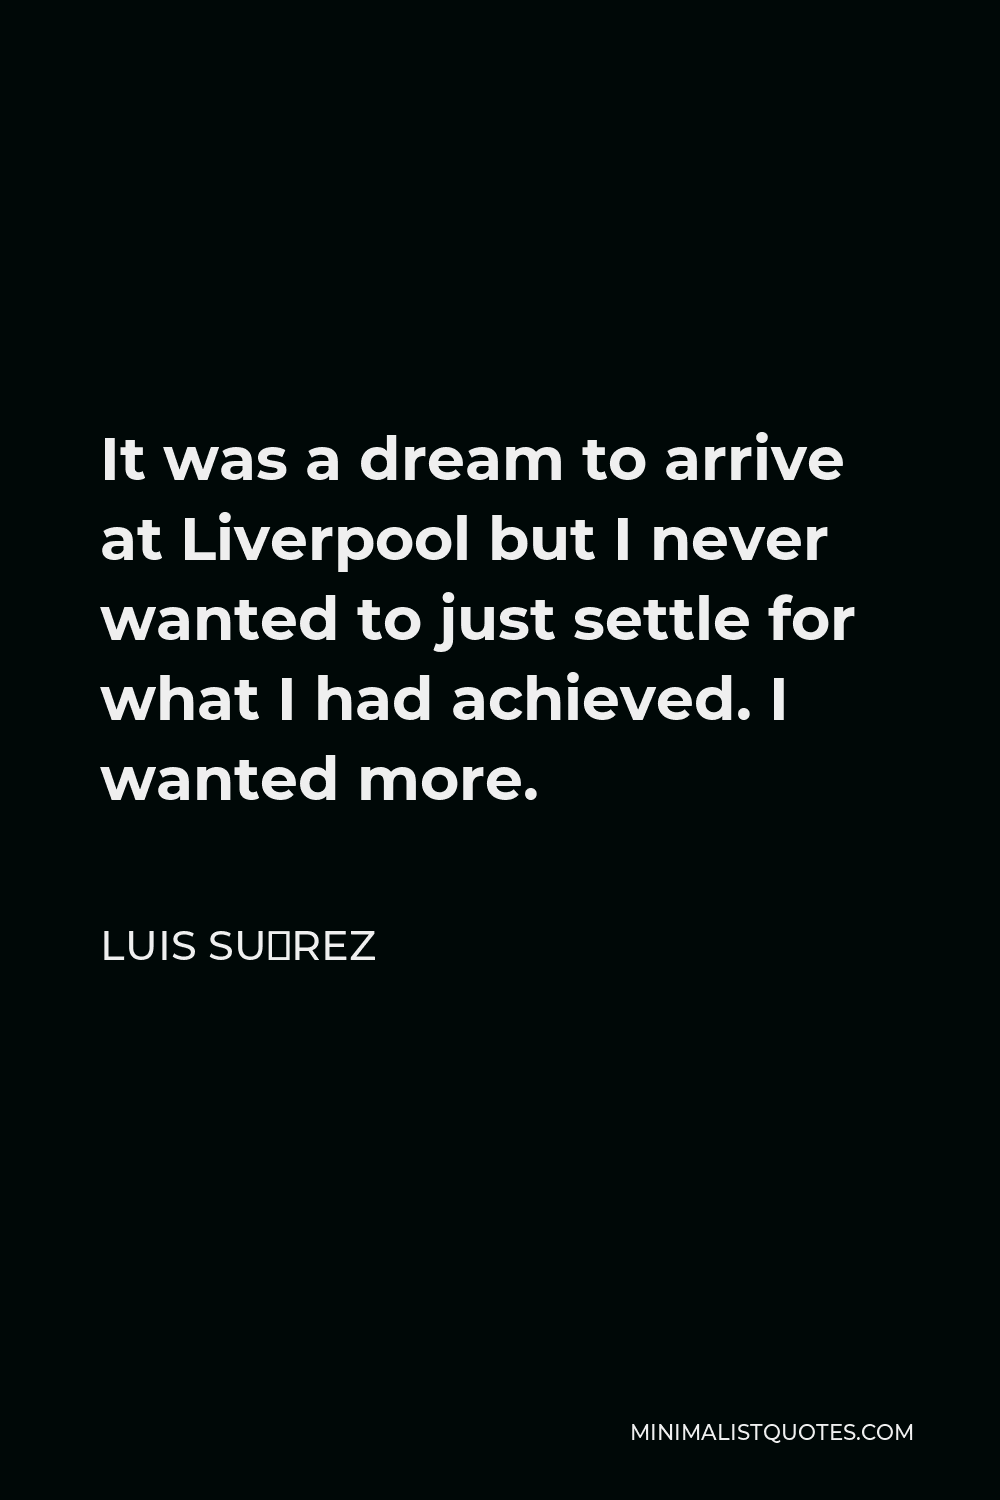 Luis Suárez Quote - It was a dream to arrive at Liverpool but I never wanted to just settle for what I had achieved. I wanted more.